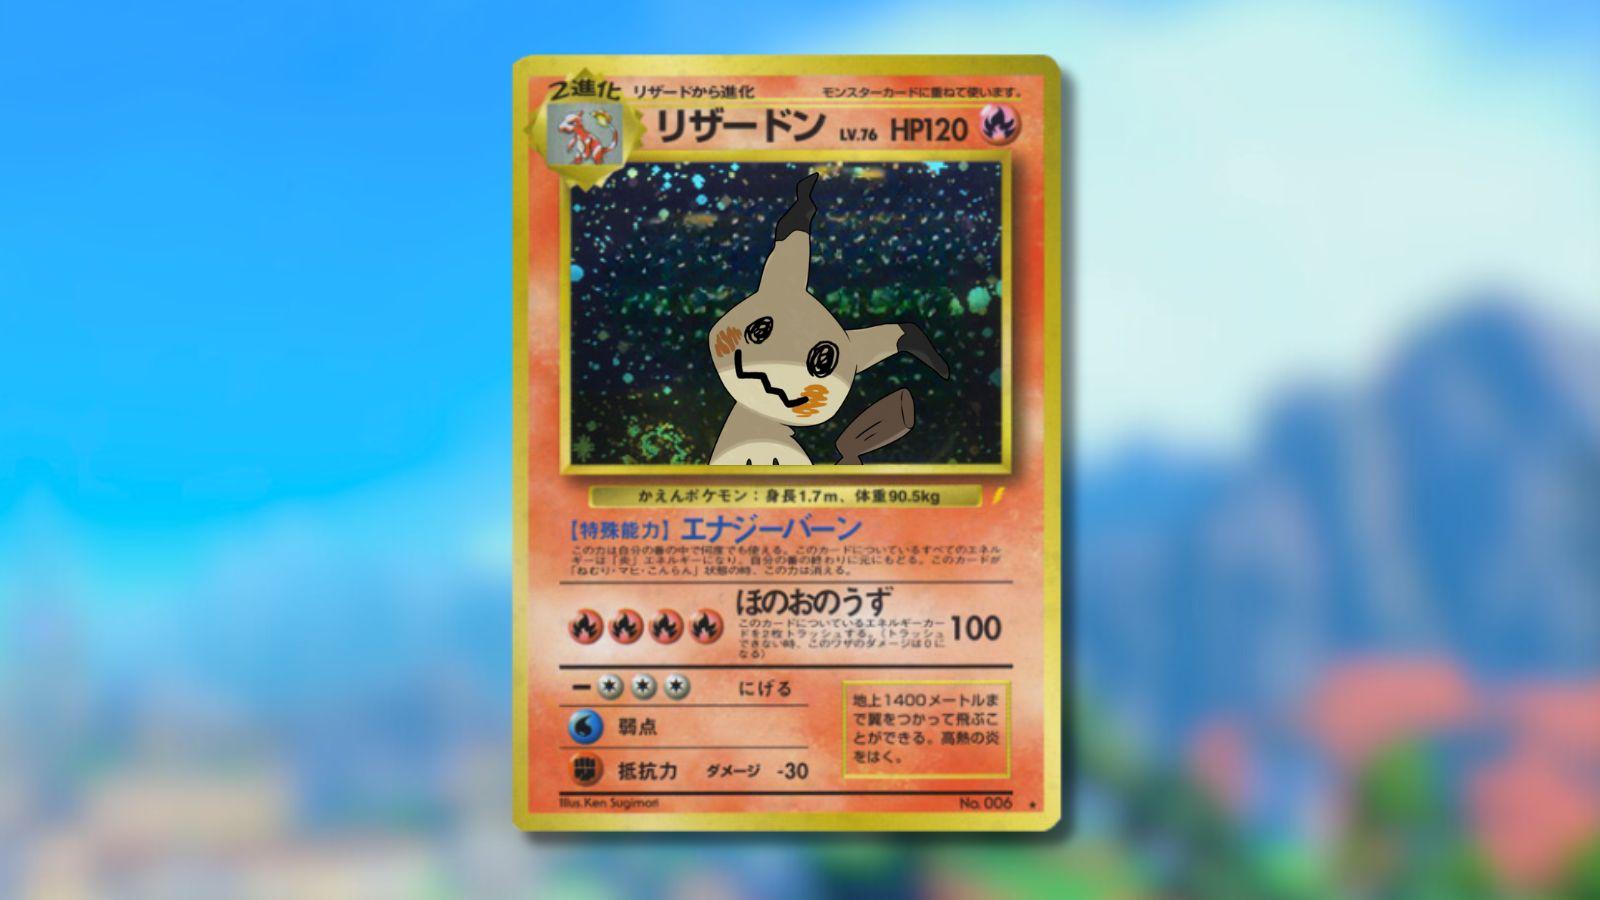 Fake Charizard Pokemon card with Mimikyu in the box and an anime background.